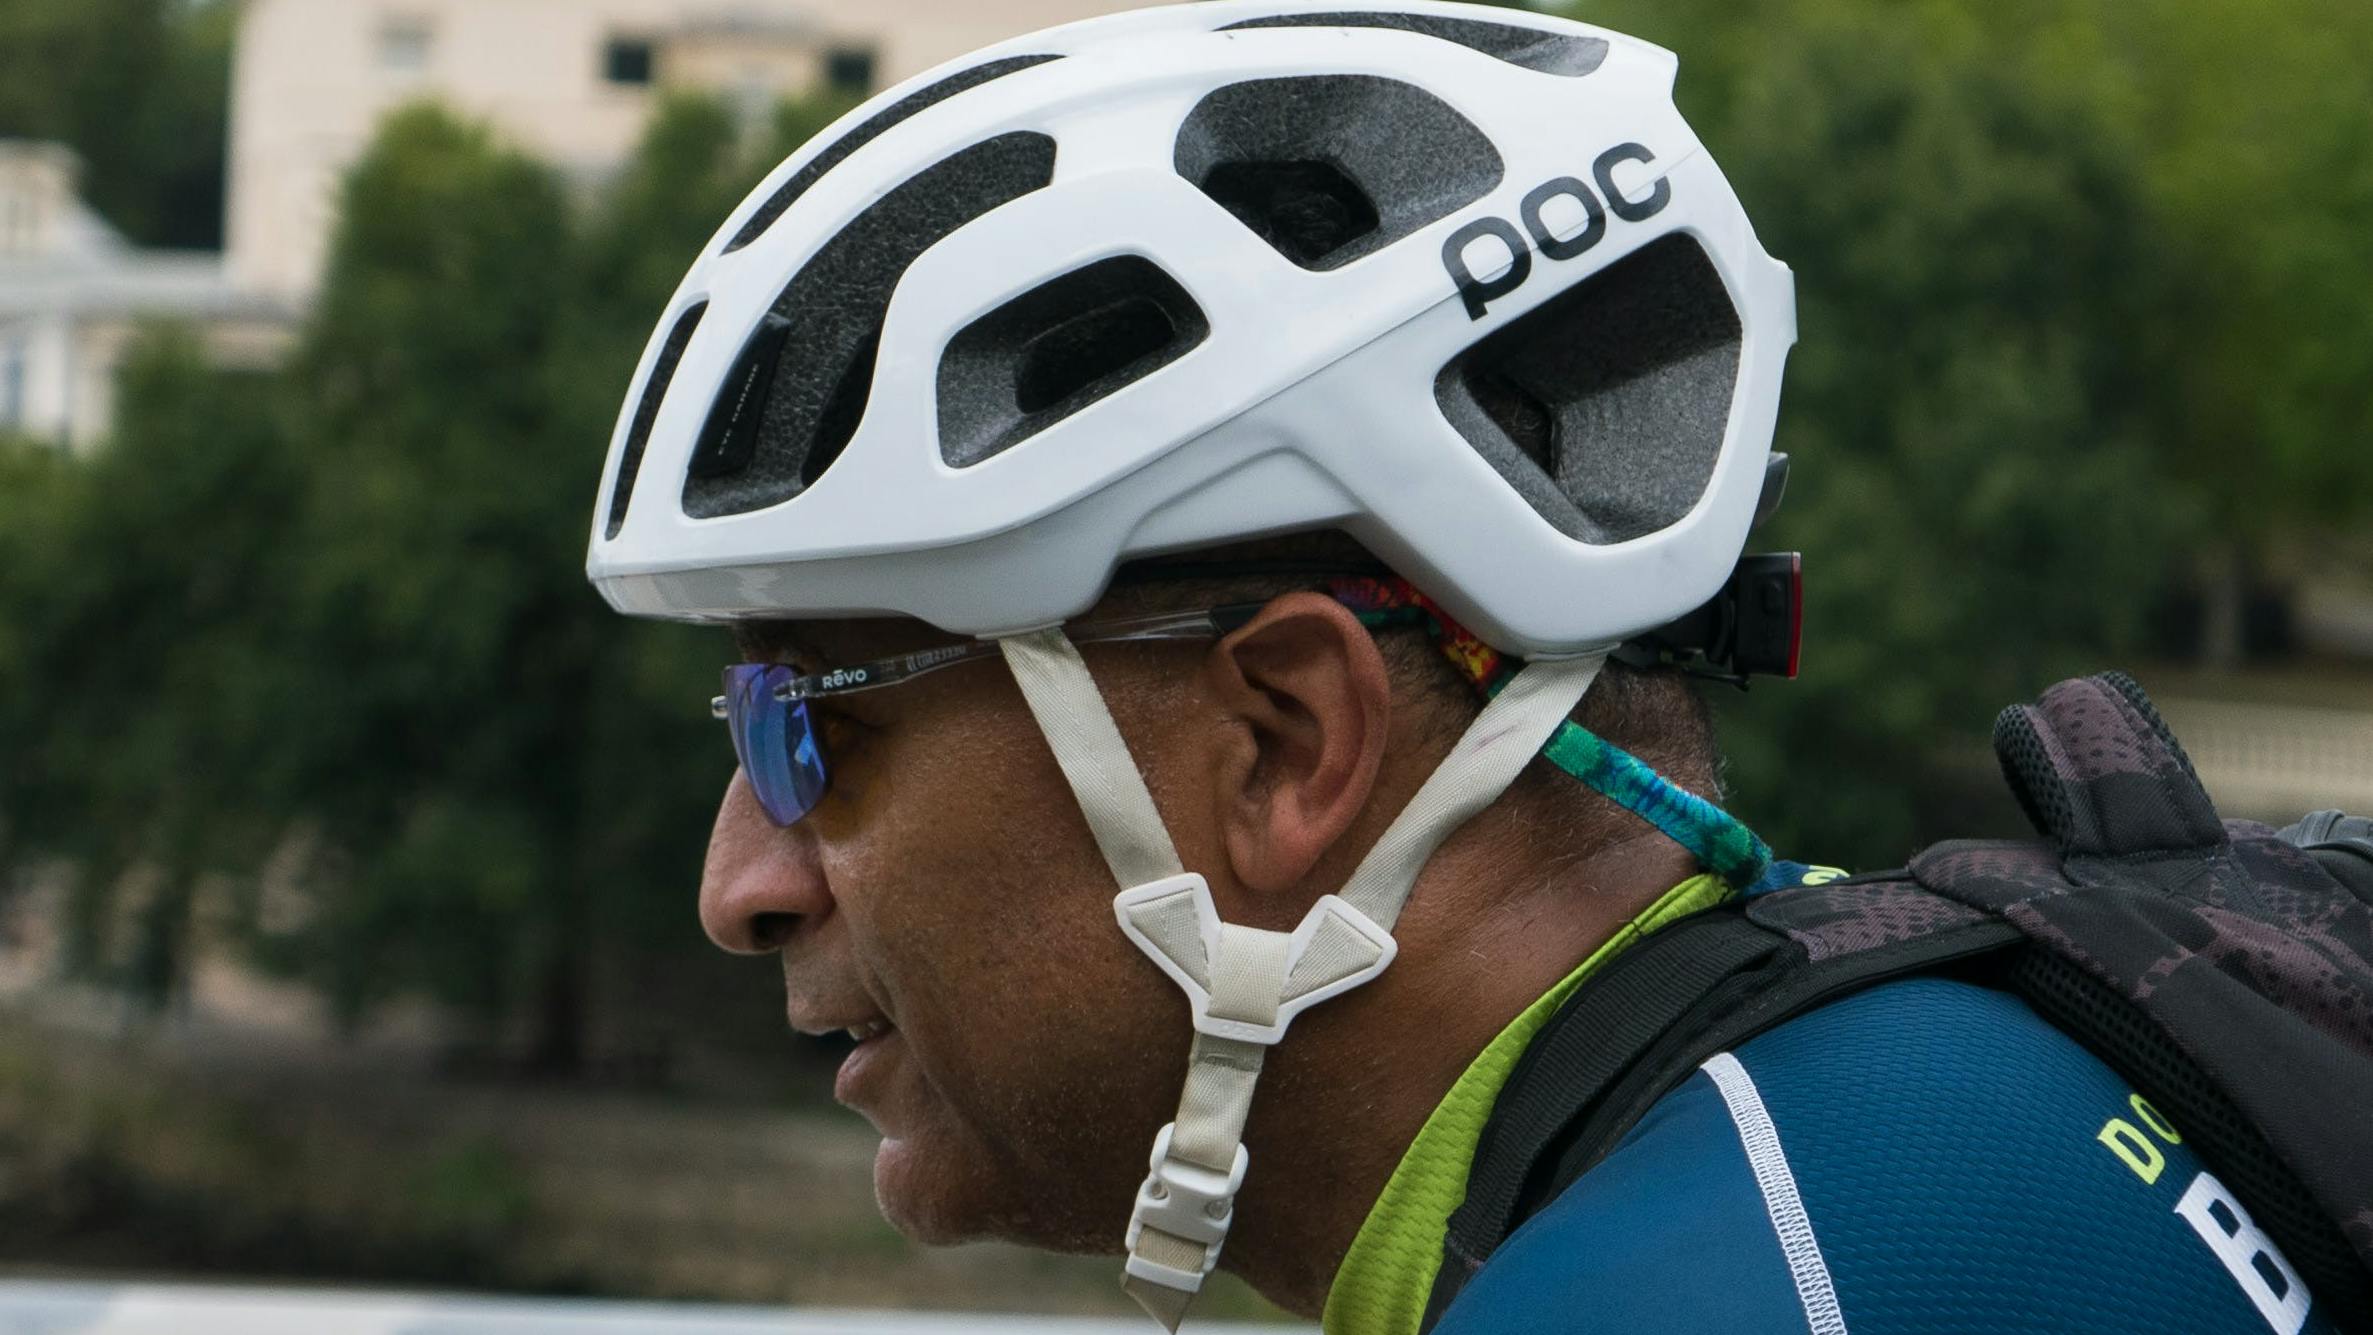 POC helmets are known for their attractive styling and comfort.